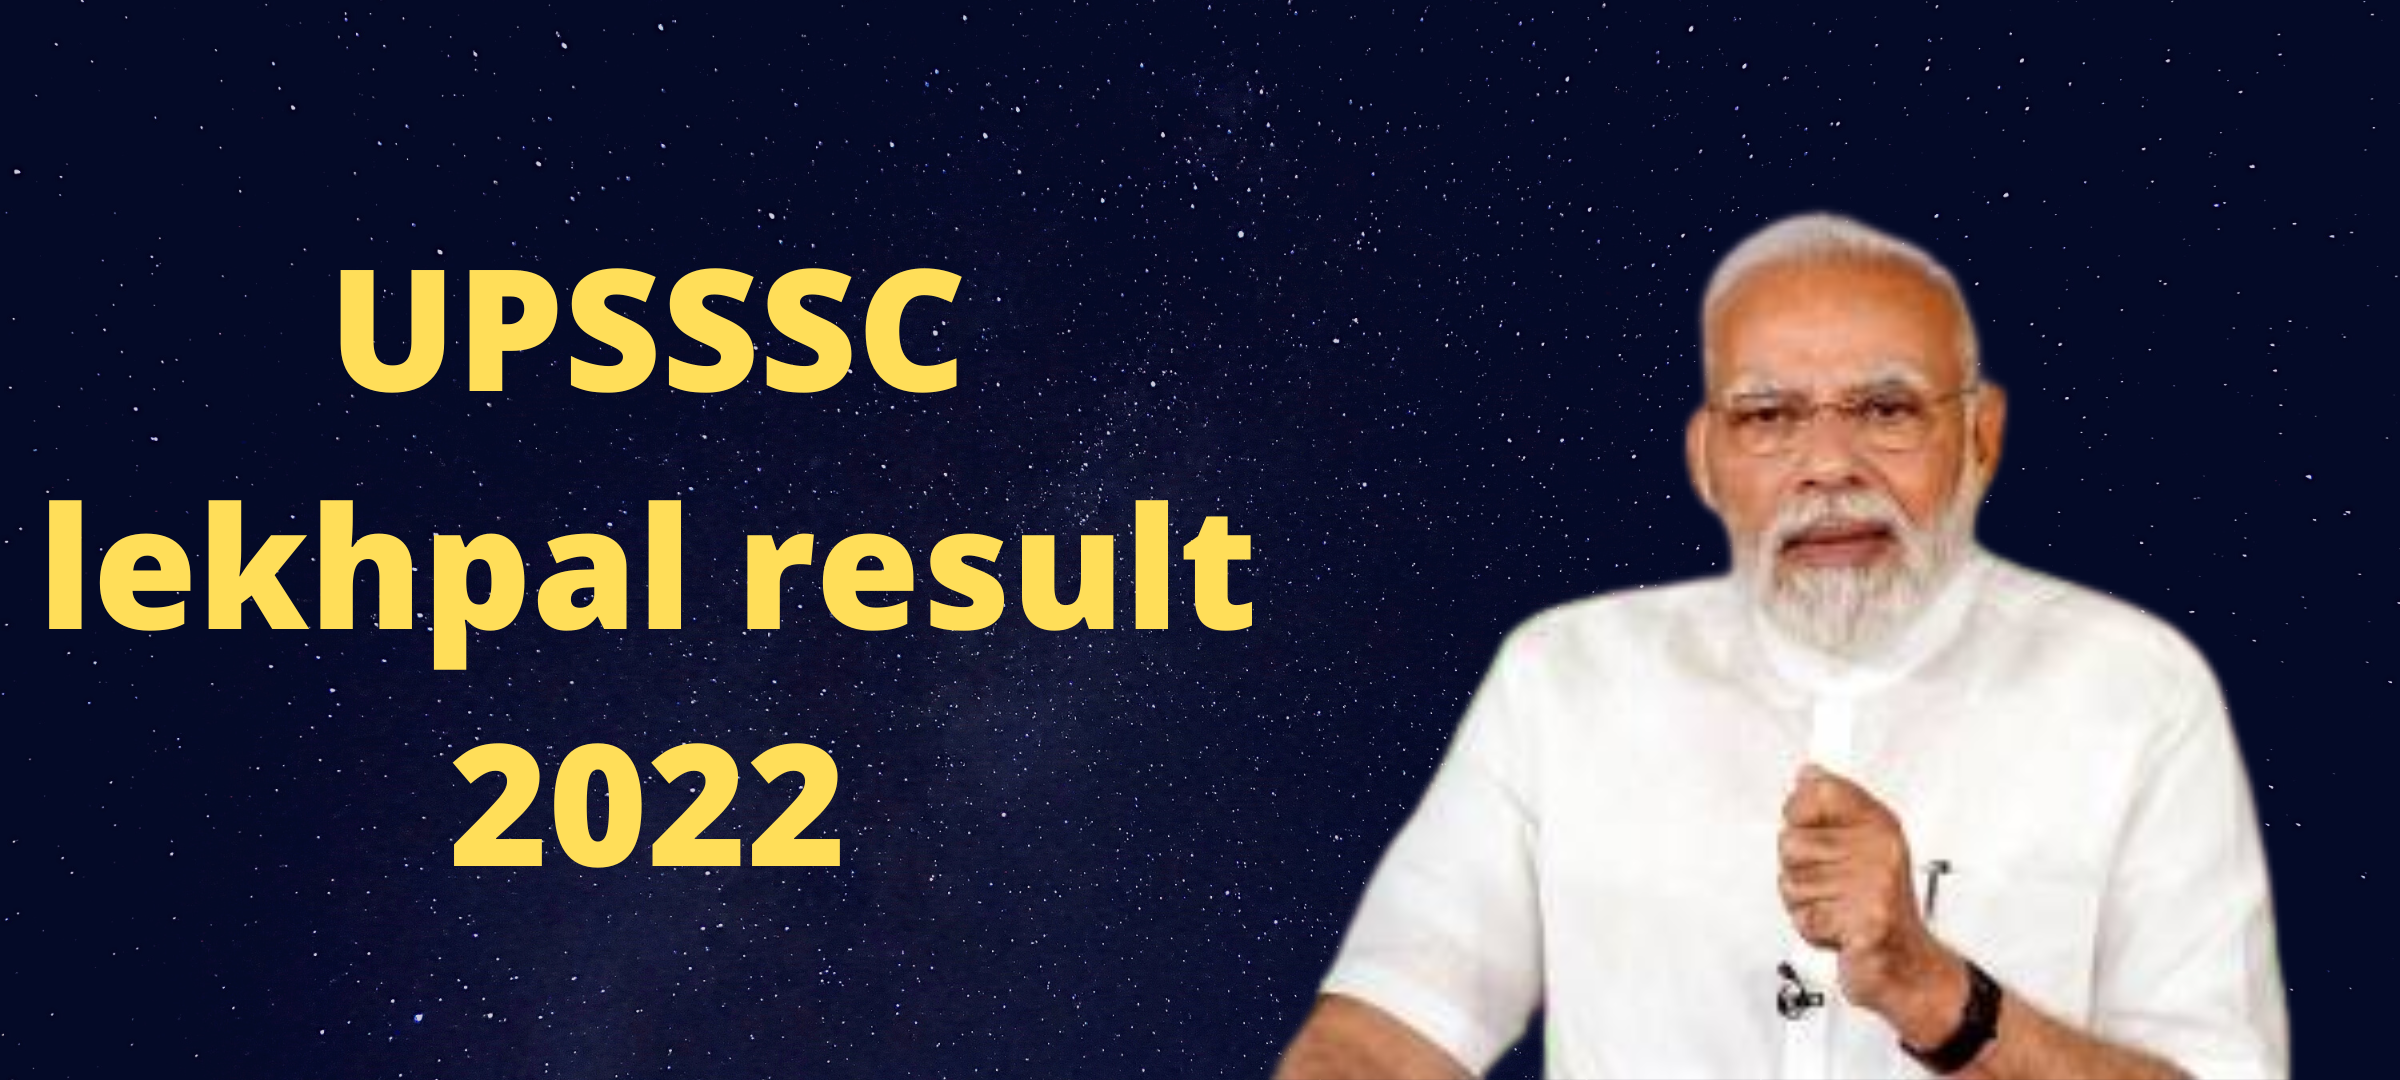 UPSSSC Lekhpal Result 2022 - UPSSSC lekhpal syllabus - upsssc lekhpal admit card - here’s how to check